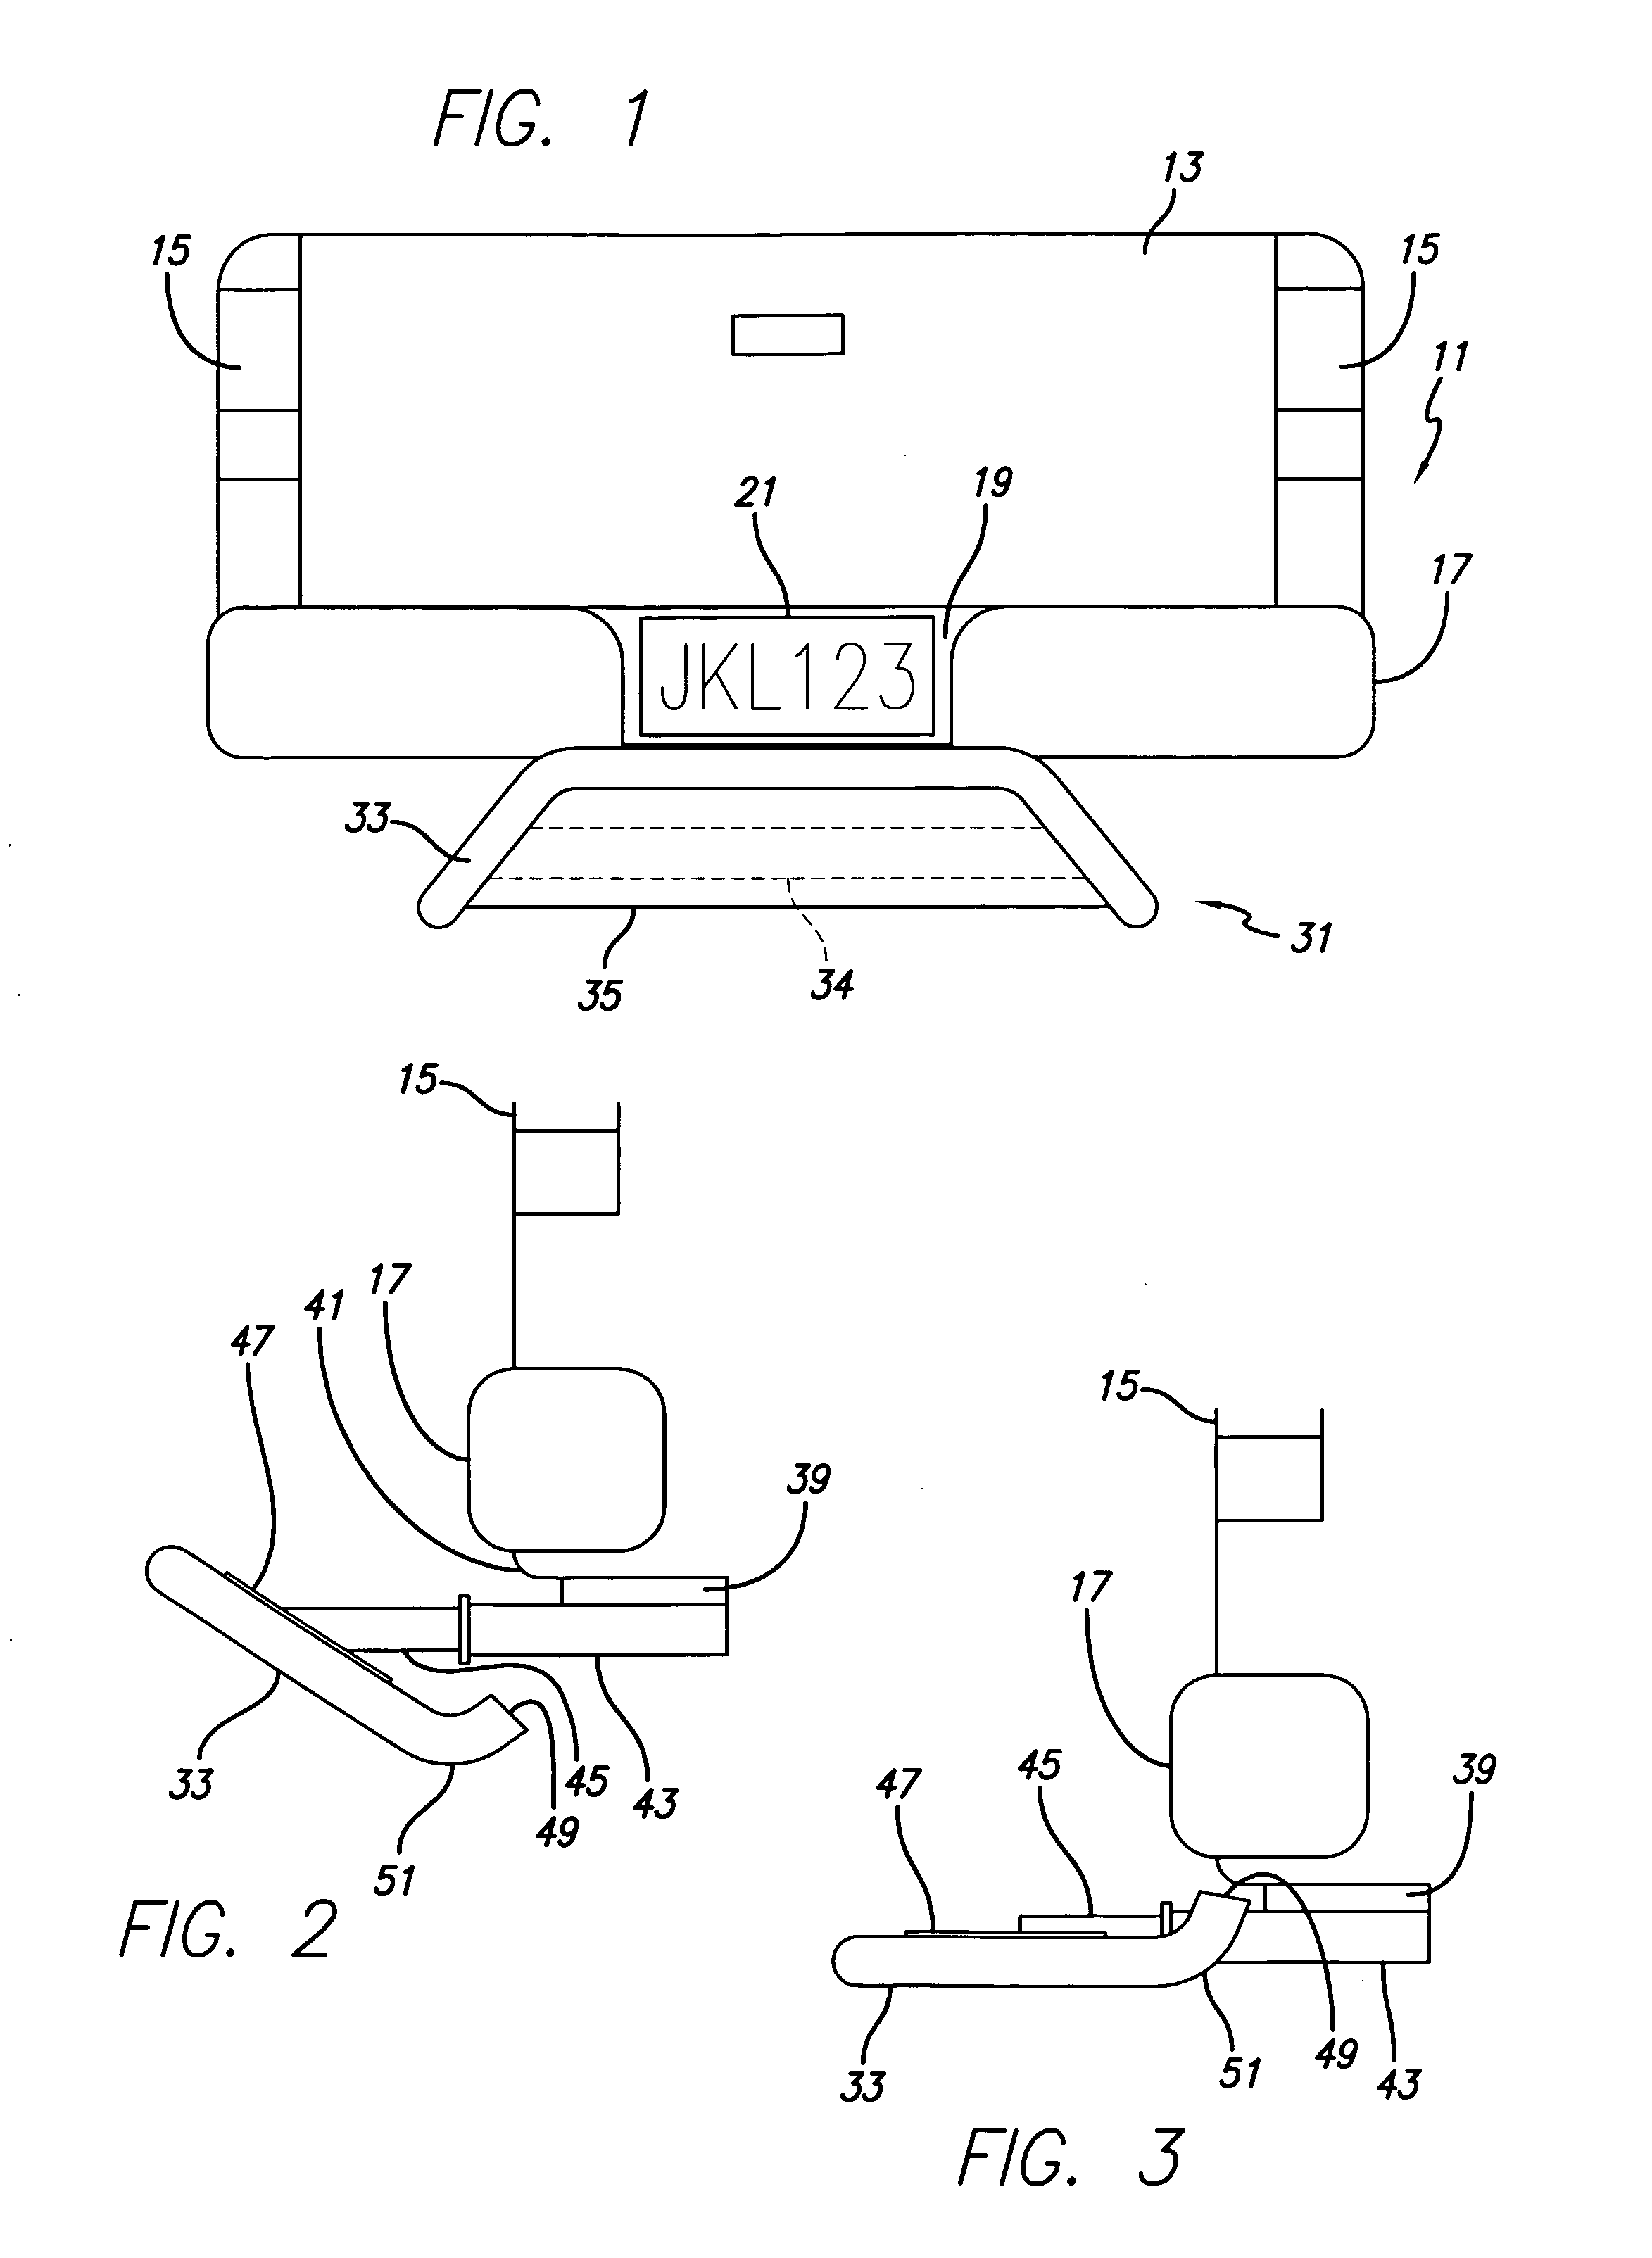 Adjustable height, protective folding step for vehicles